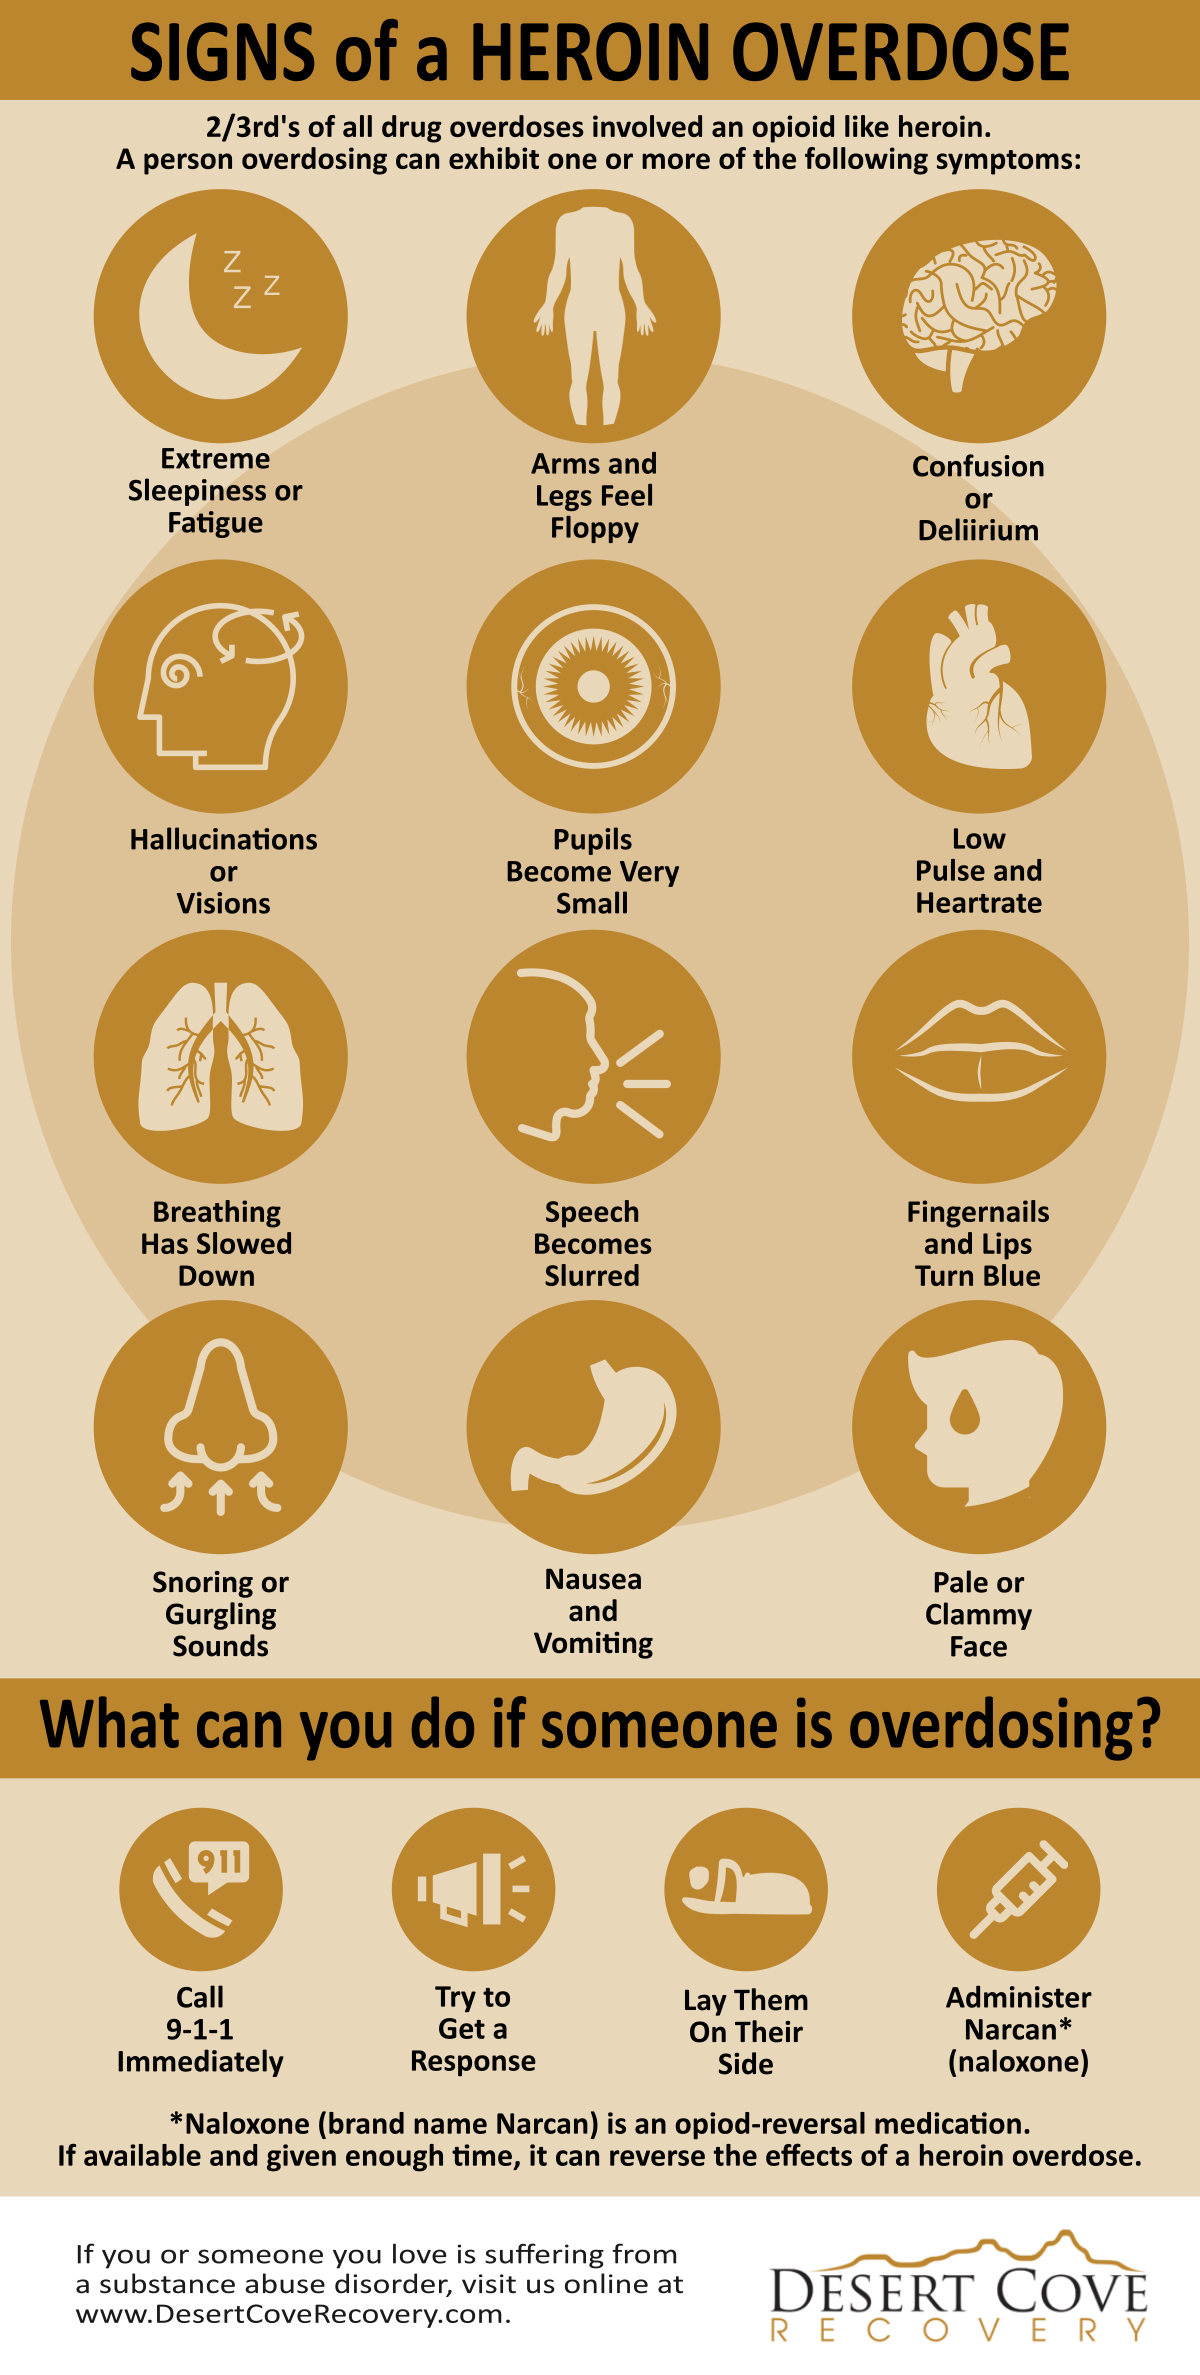 Signs Of Heroin Overdose - What Can You Do